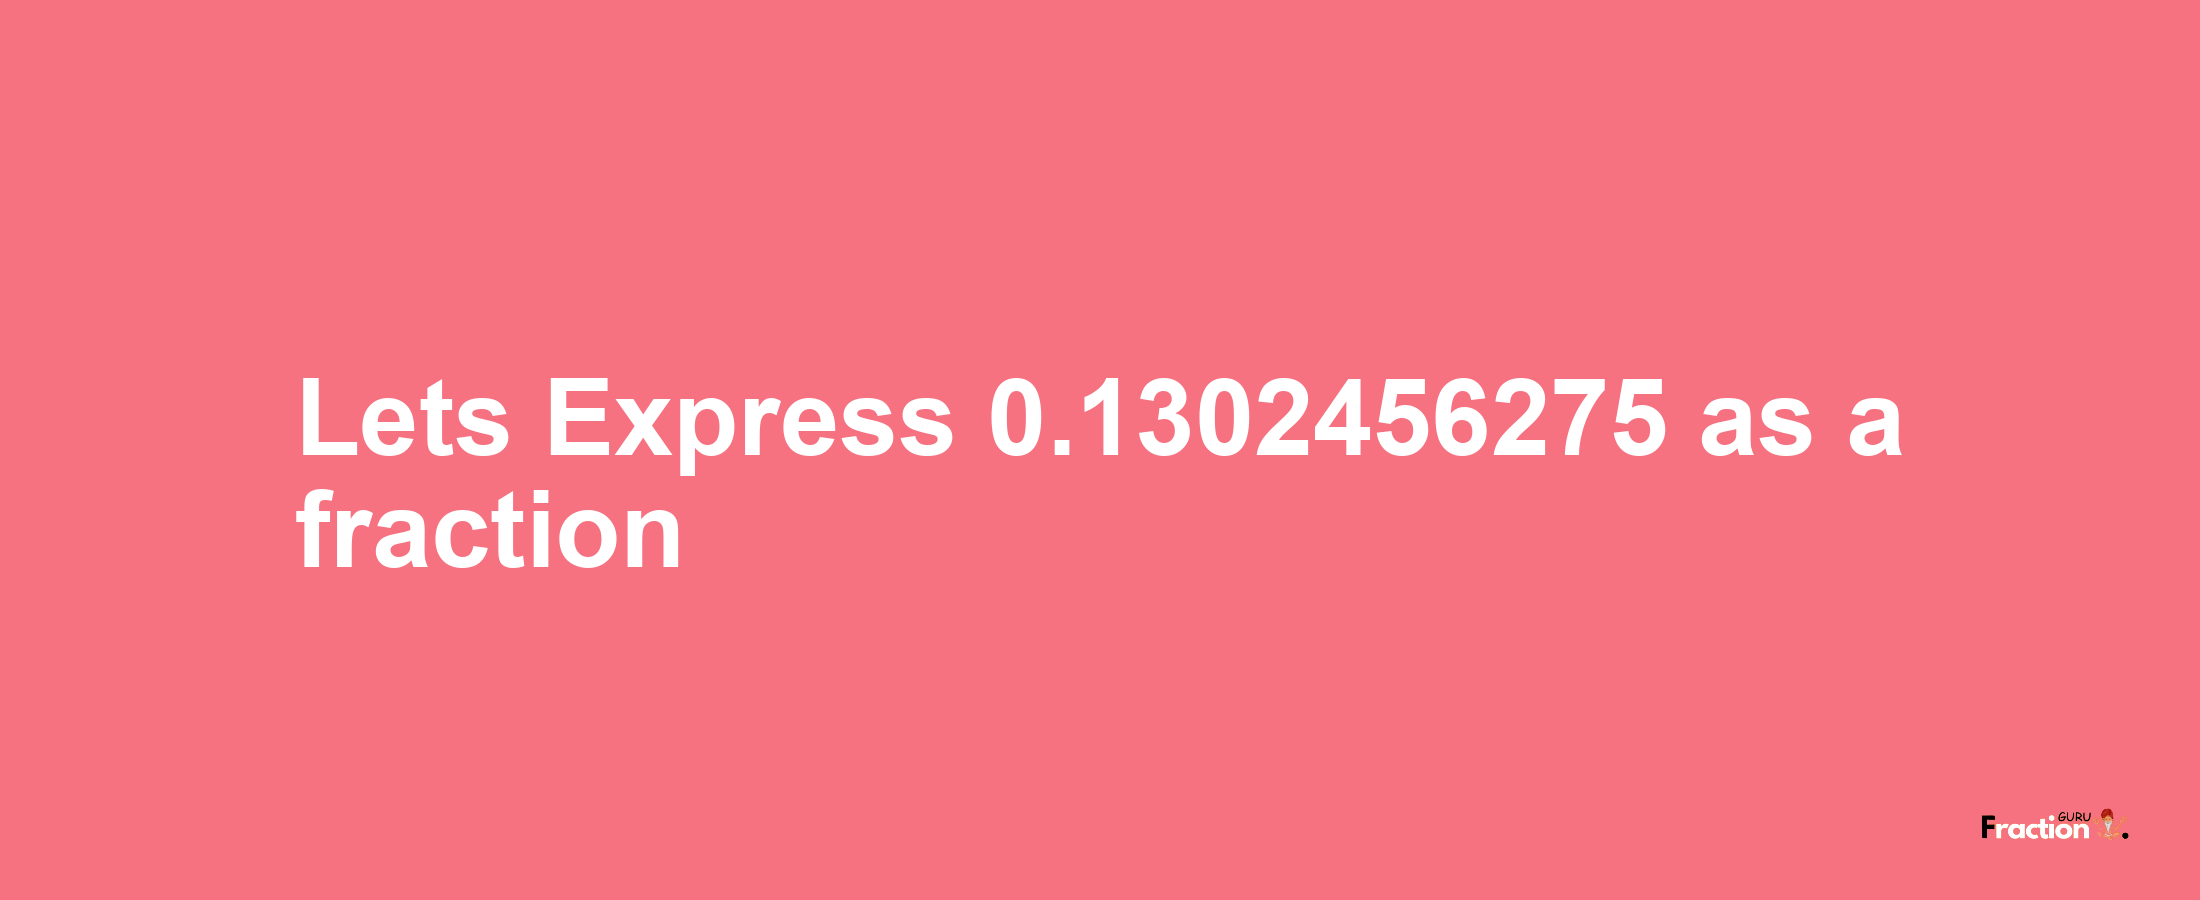 Lets Express 0.1302456275 as afraction